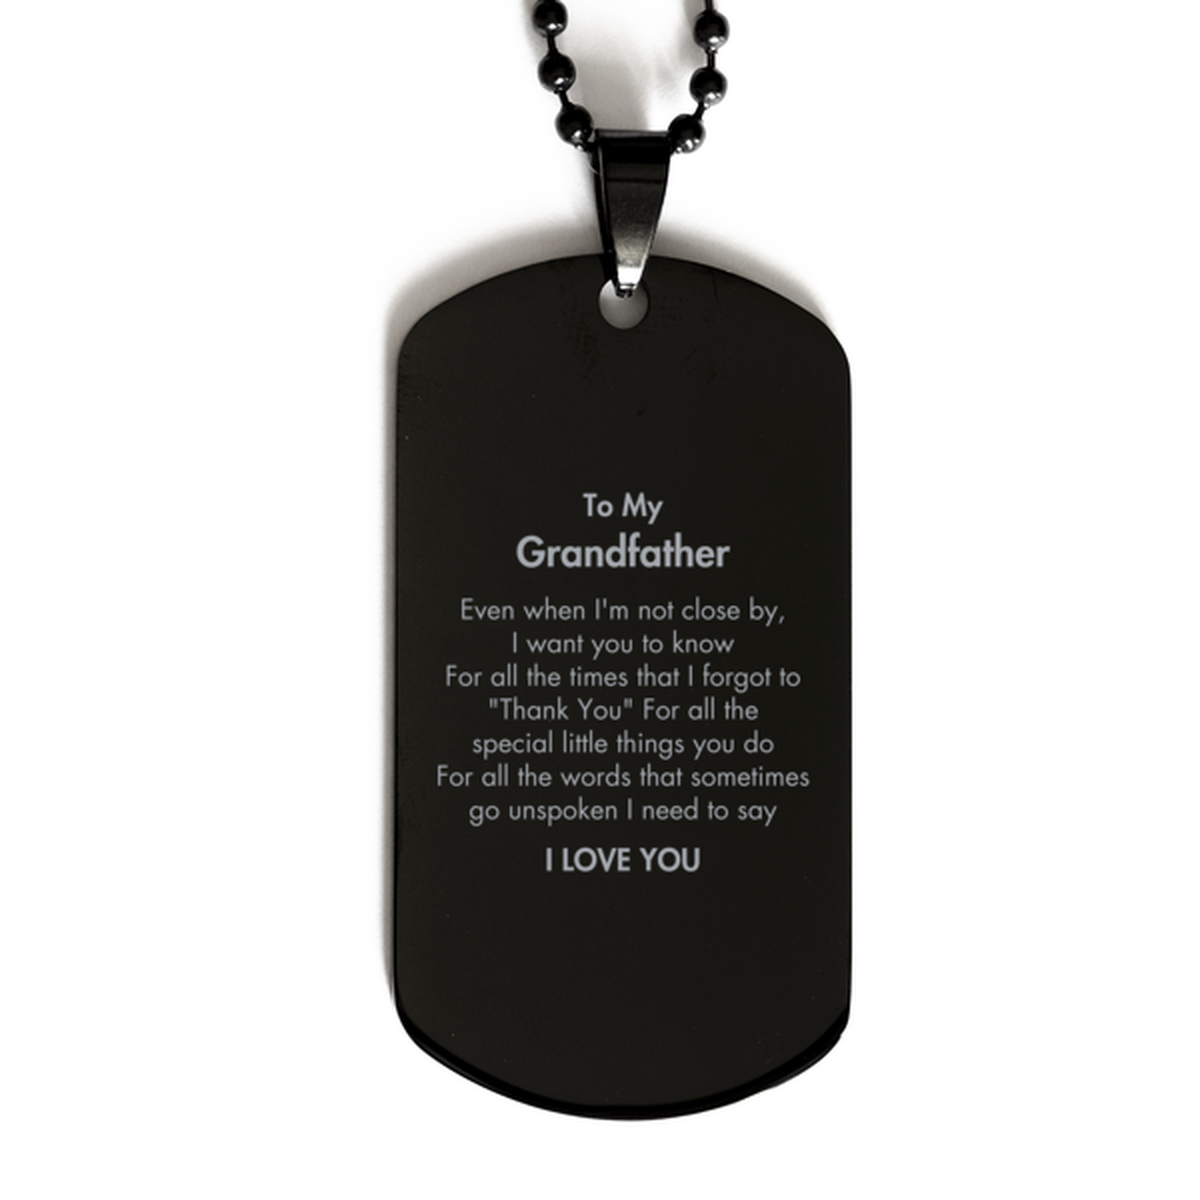 Thank You Gifts for Grandfather, Keepsake Black Dog Tag Gifts for Grandfather Birthday Mother's day Father's Day Grandfather For all the words That sometimes go unspoken I need to say I LOVE YOU